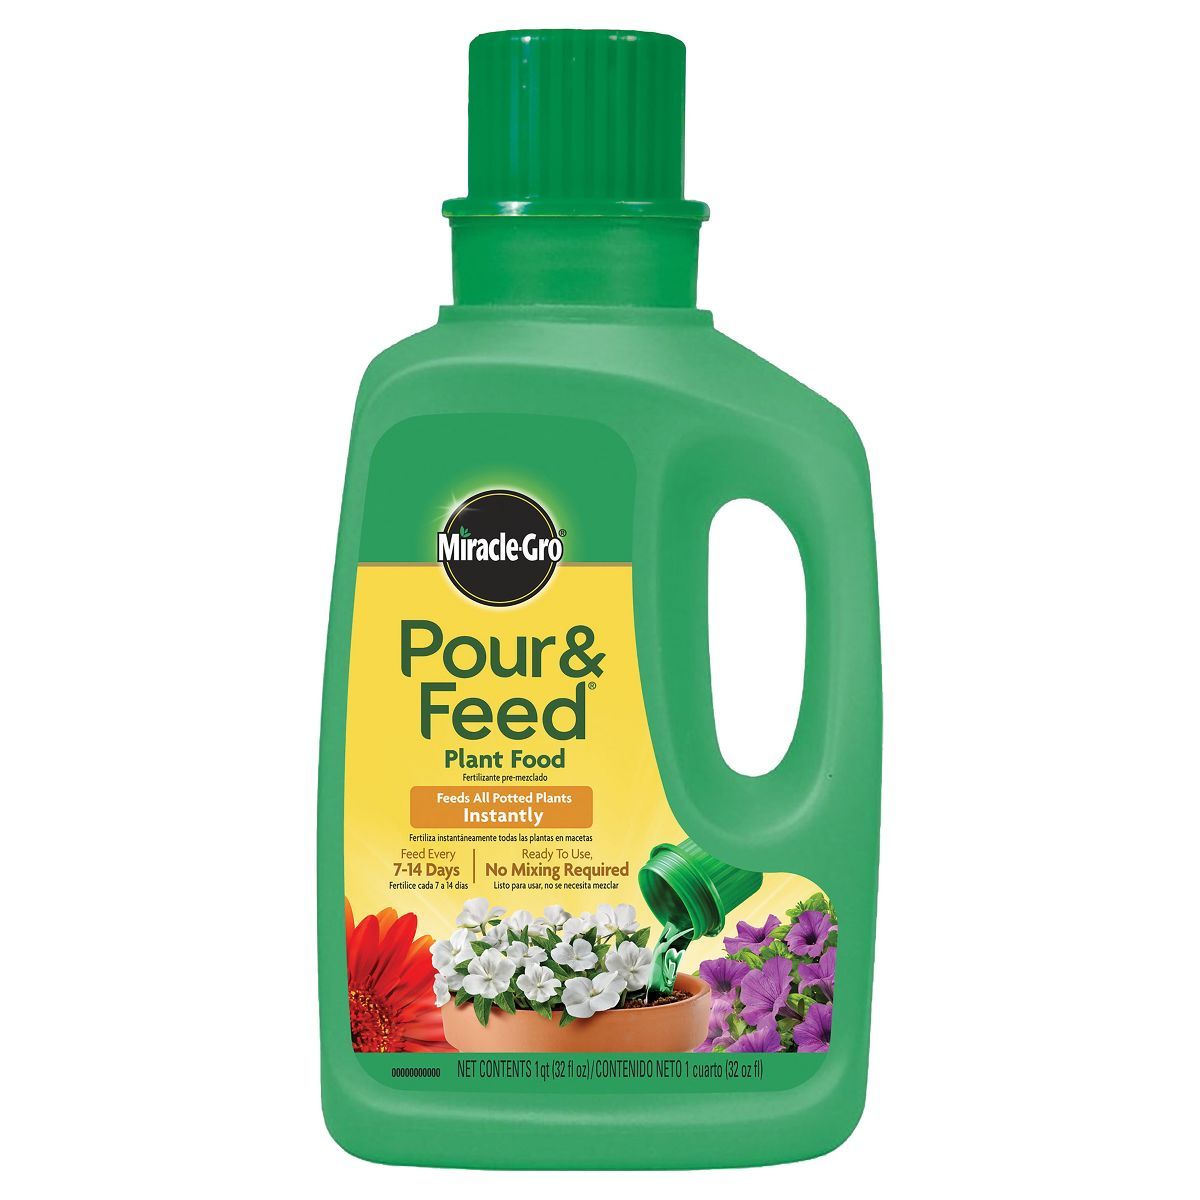 Miracle-Gro Pour & Feed Liquid Plant Food 32oz Ready to Use | Target